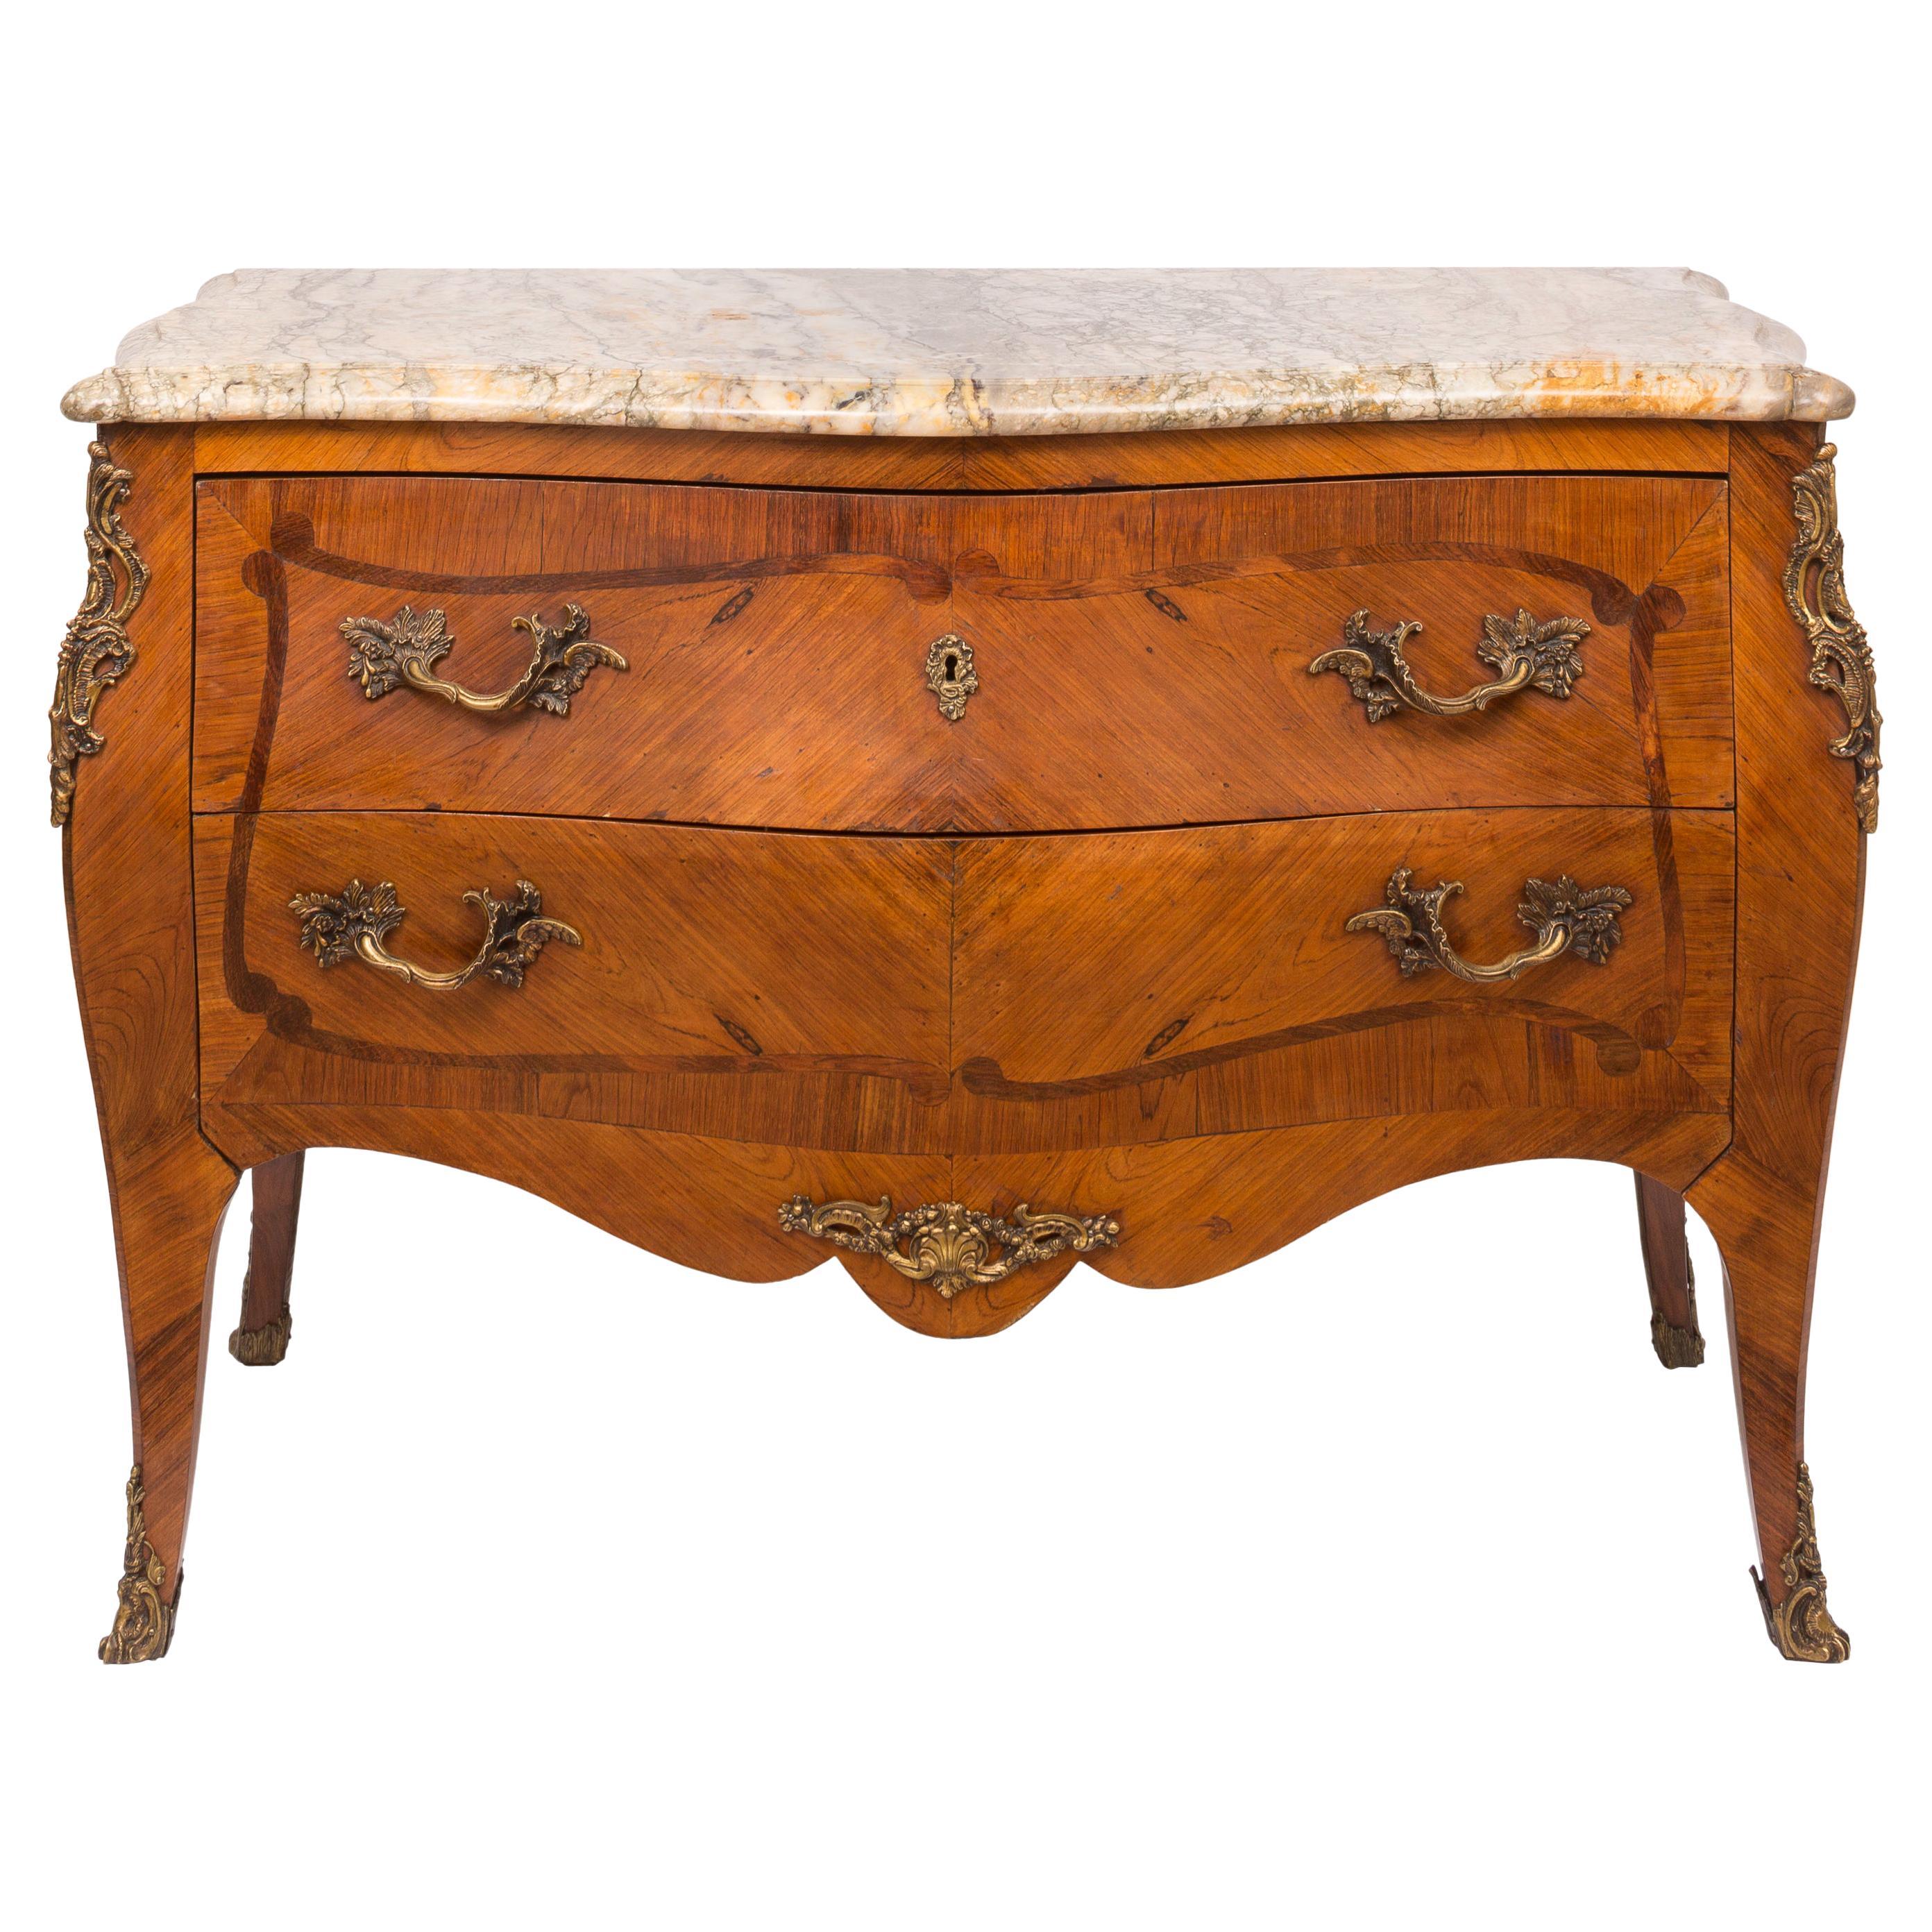 19th Century Louis XV Style Bombe Commode with Marble Top, Marquetry Detailing